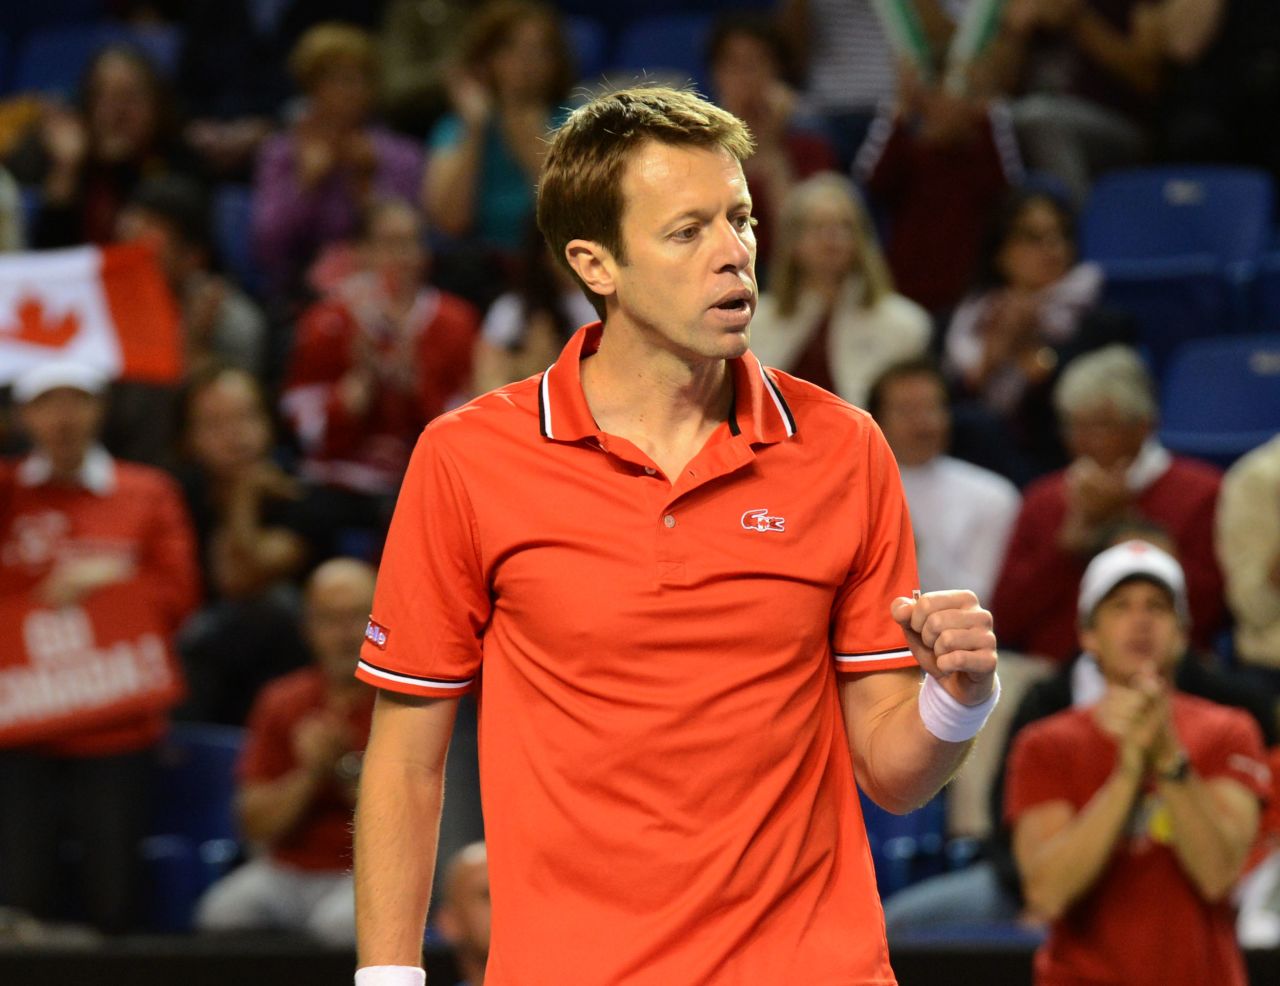 Prior to the emergence of Bouchard, Raonic and Pospisil, Daniel Nestor carried the torch for Canadian tennis. The 41-year-old, who is still playing, has won 85 men's doubles titles to make him one of the best doubles players in tennis history. 